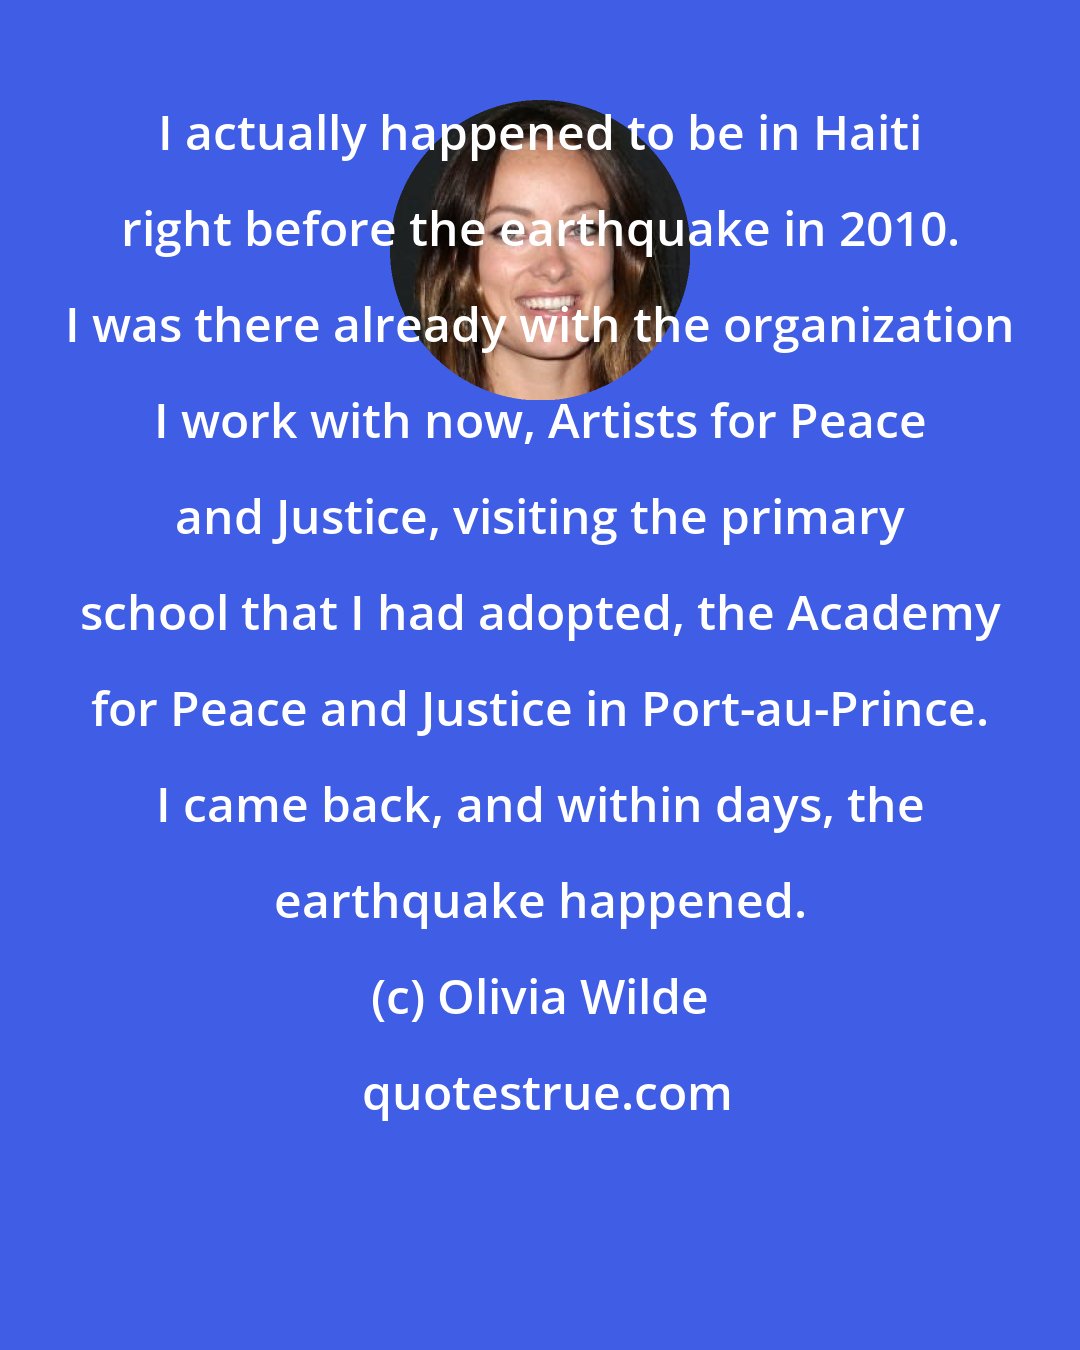 Olivia Wilde: I actually happened to be in Haiti right before the earthquake in 2010. I was there already with the organization I work with now, Artists for Peace and Justice, visiting the primary school that I had adopted, the Academy for Peace and Justice in Port-au-Prince. I came back, and within days, the earthquake happened.